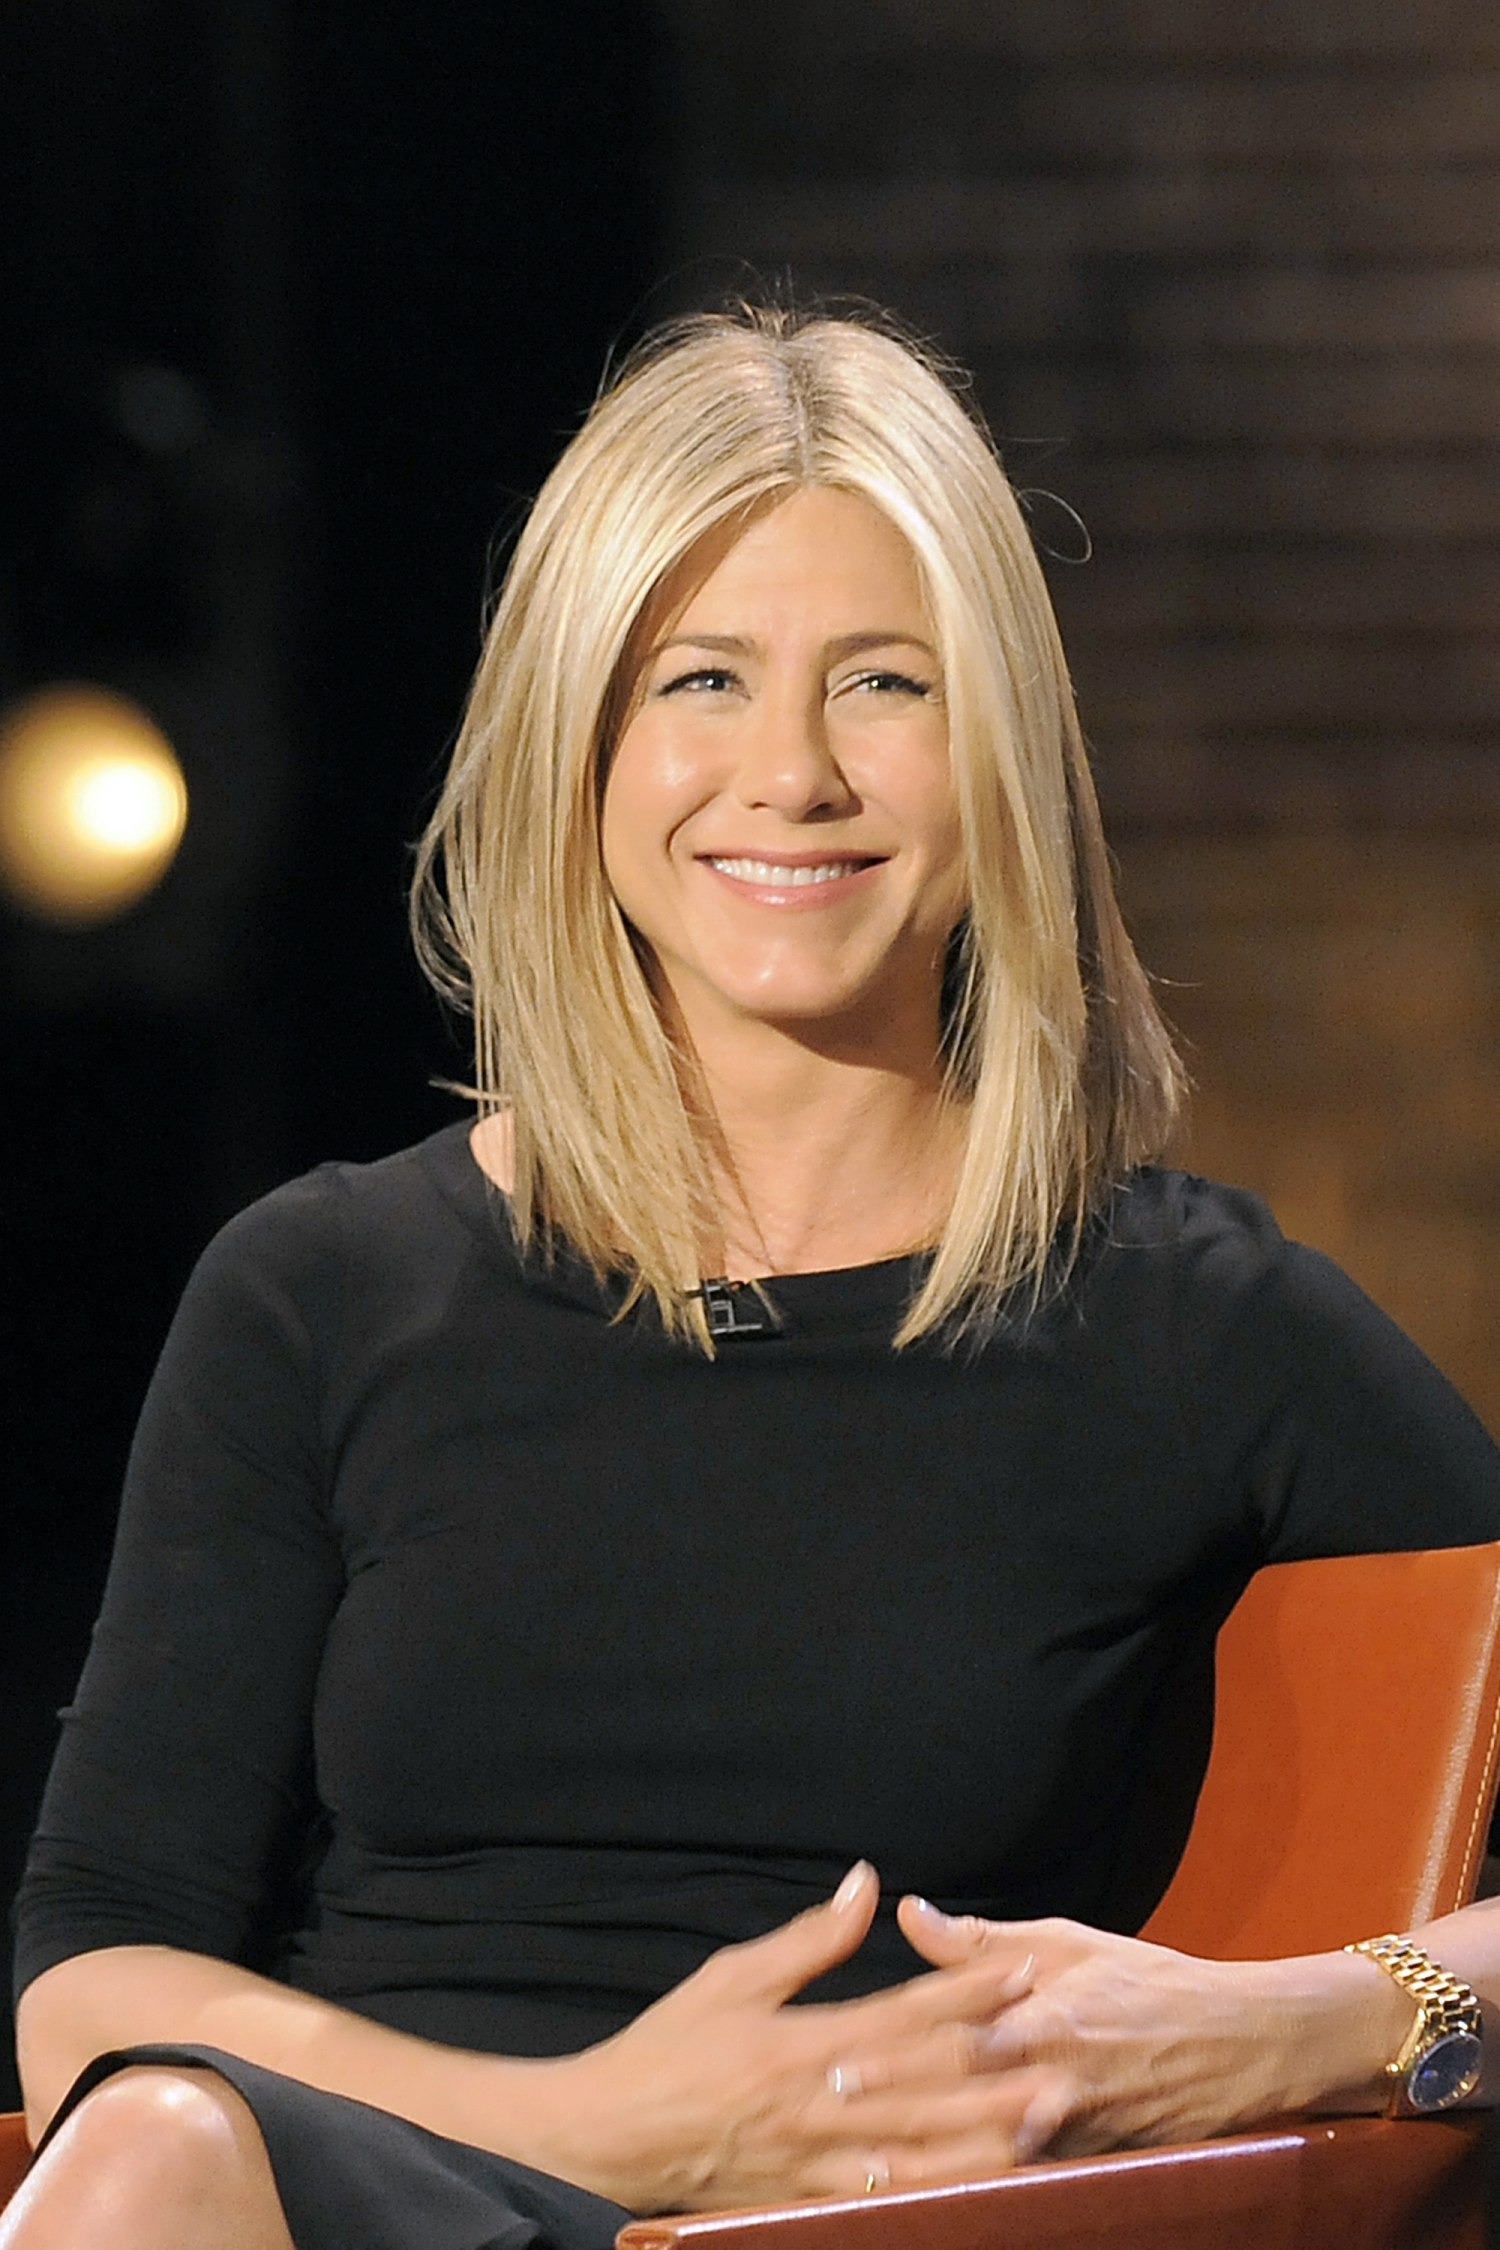 Jennifer Aniston's hair: From 'The Rachel' to her signature 'do